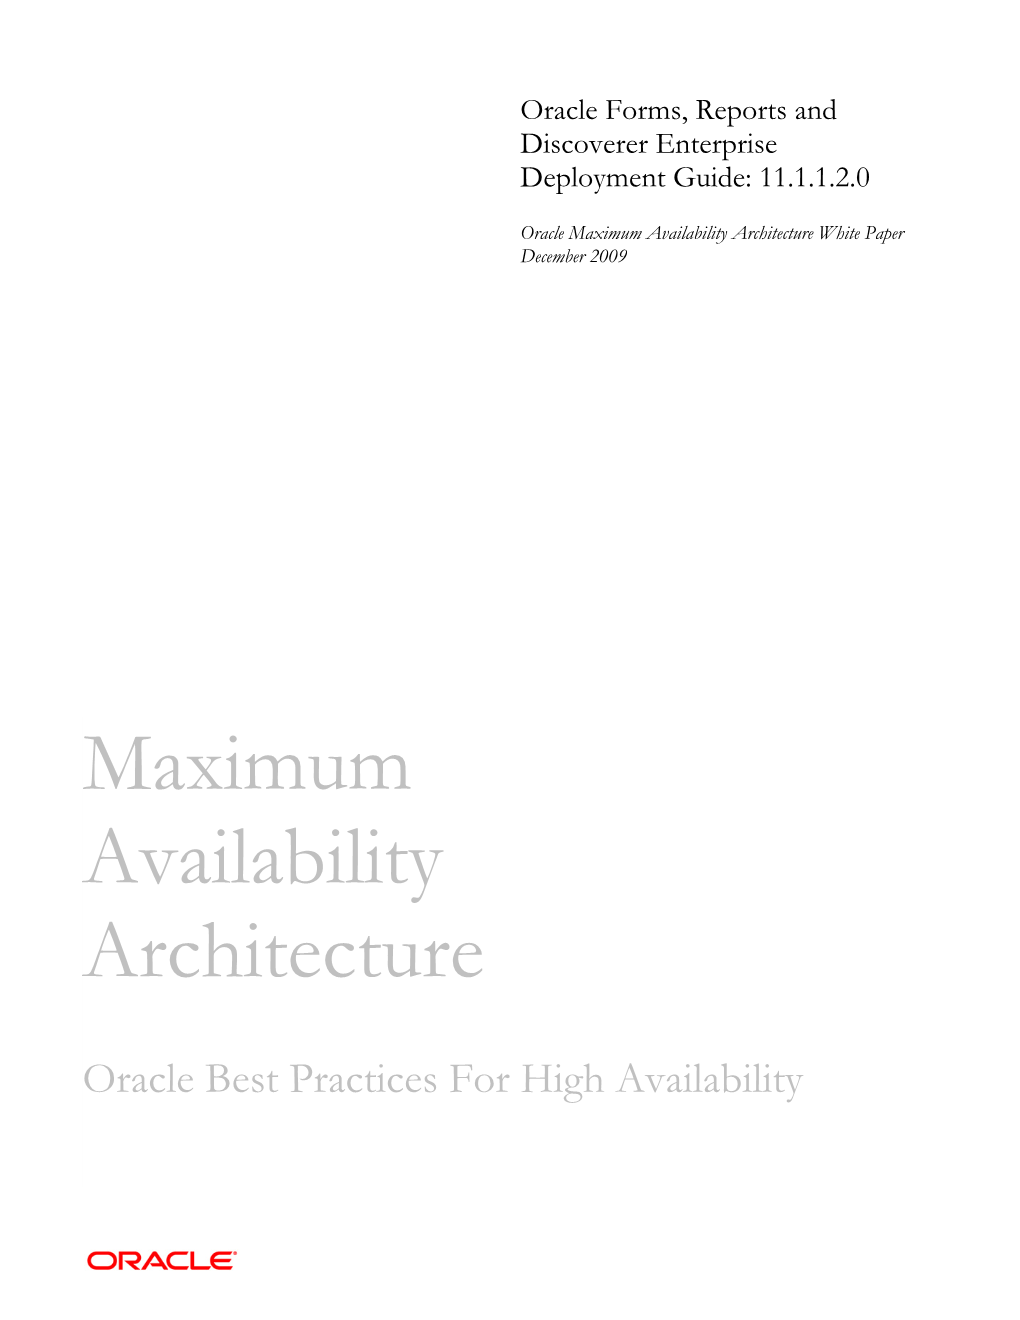 Oracle Forms, Reports and Discoverer Enterprise Deployment Guide: 11.1.1.2.0